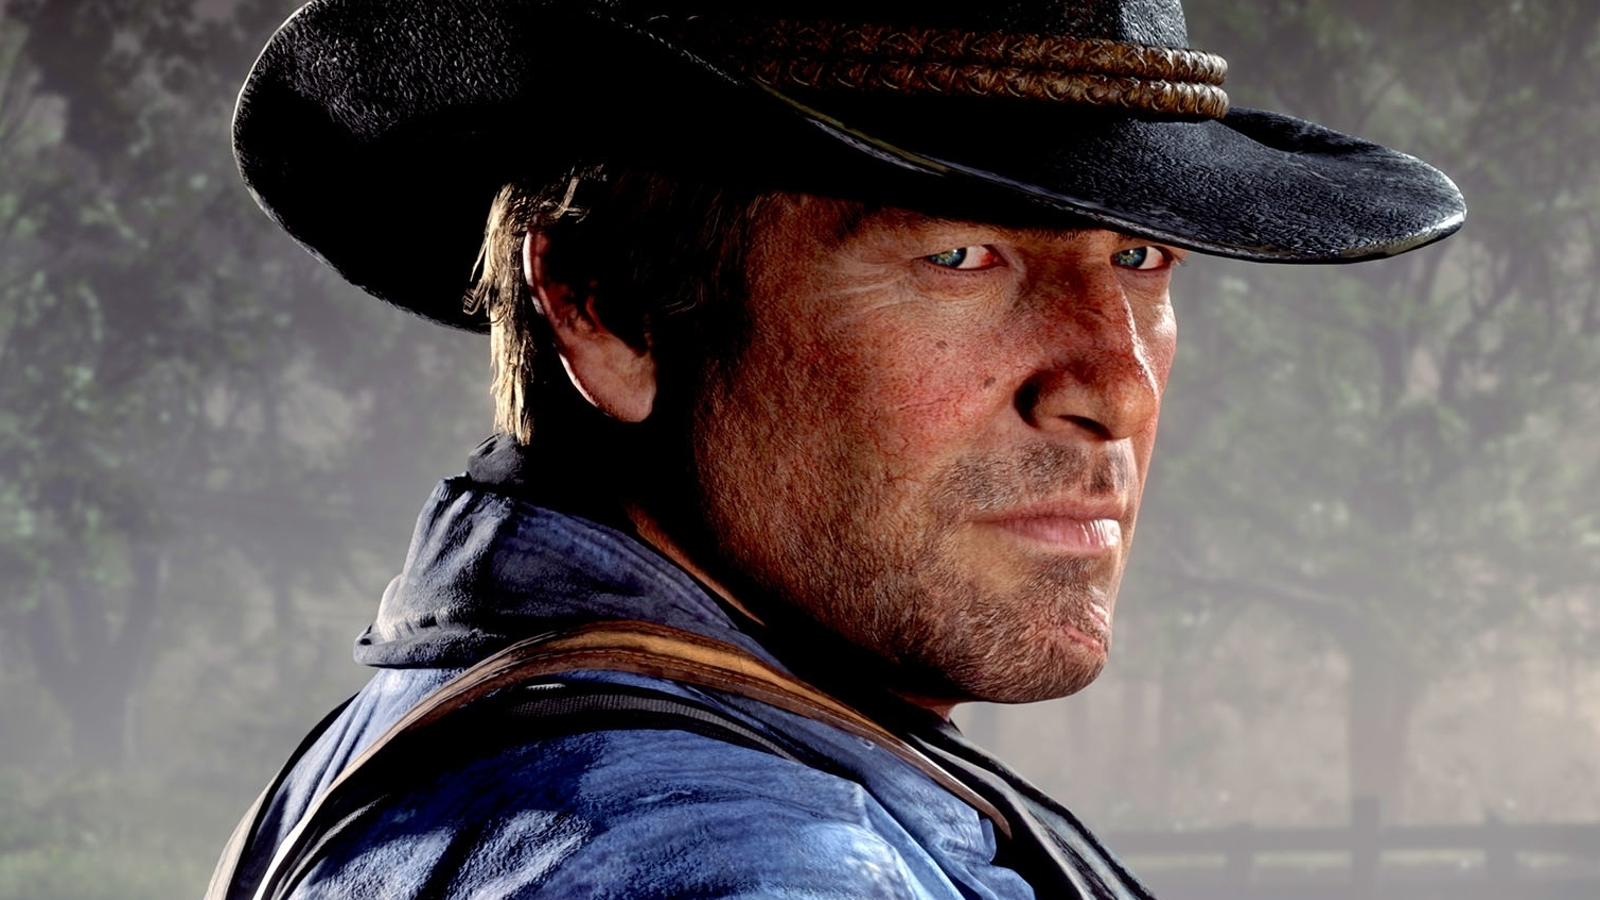 Red Dead Redemption 2 PC review - Running into and from trouble